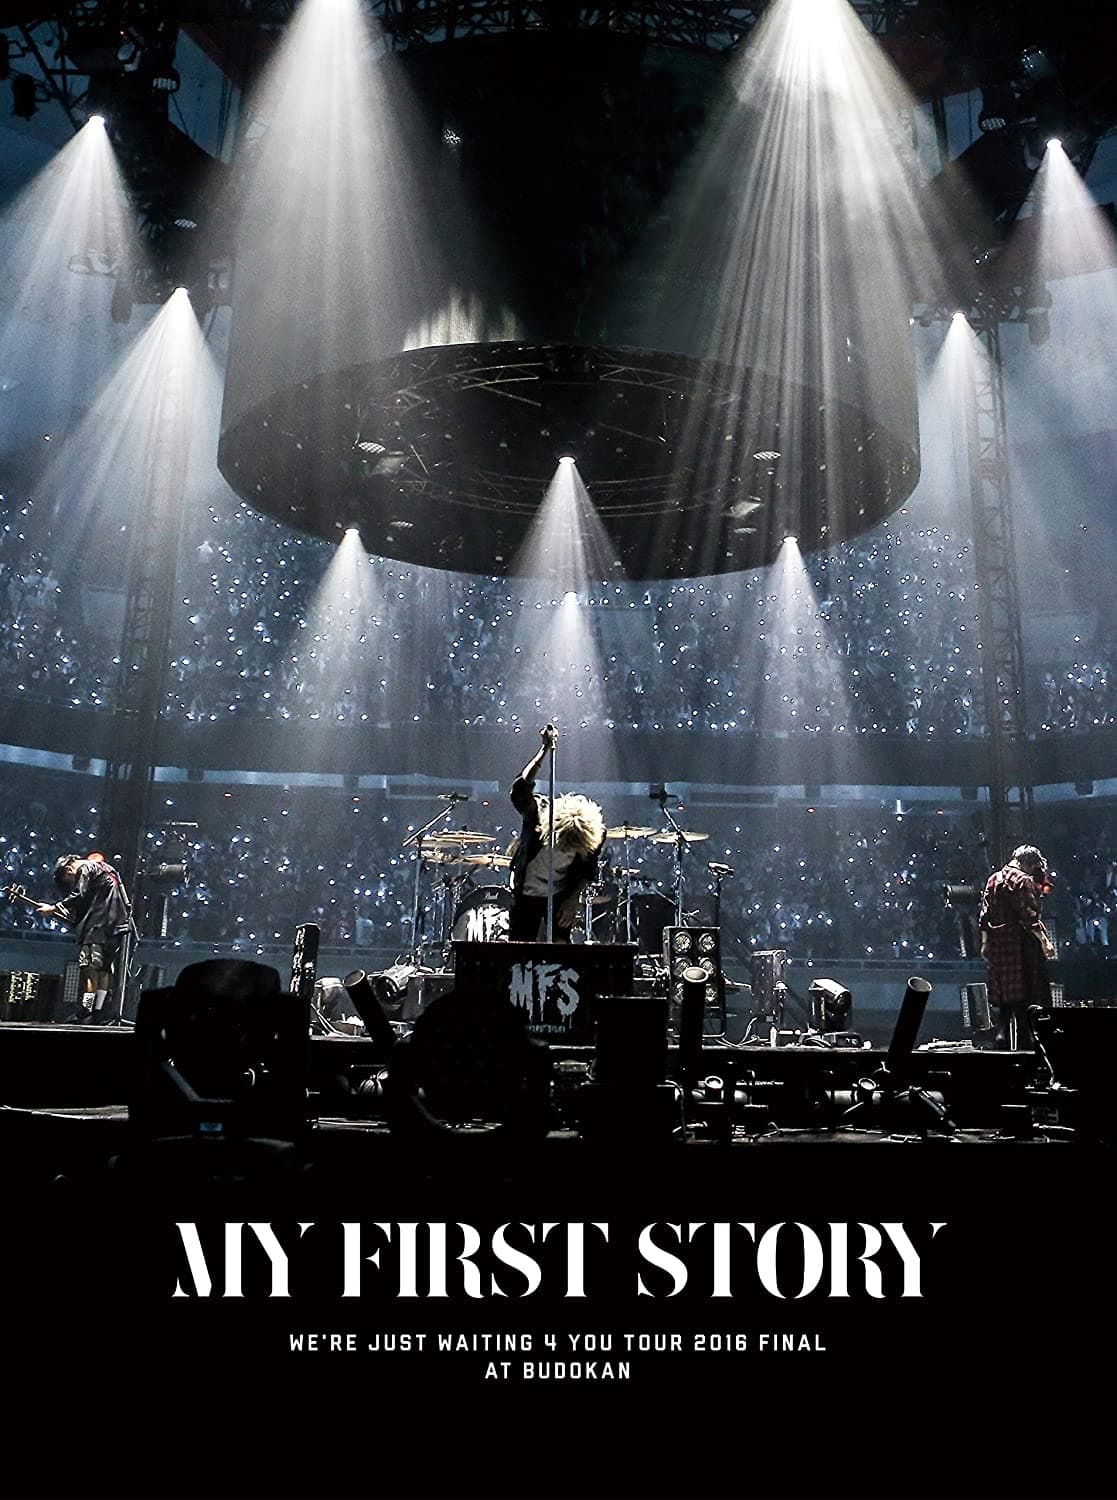 MY FIRST STORY - We're Just Waiting 4 You Tour 2016 Final at BUDOKAN